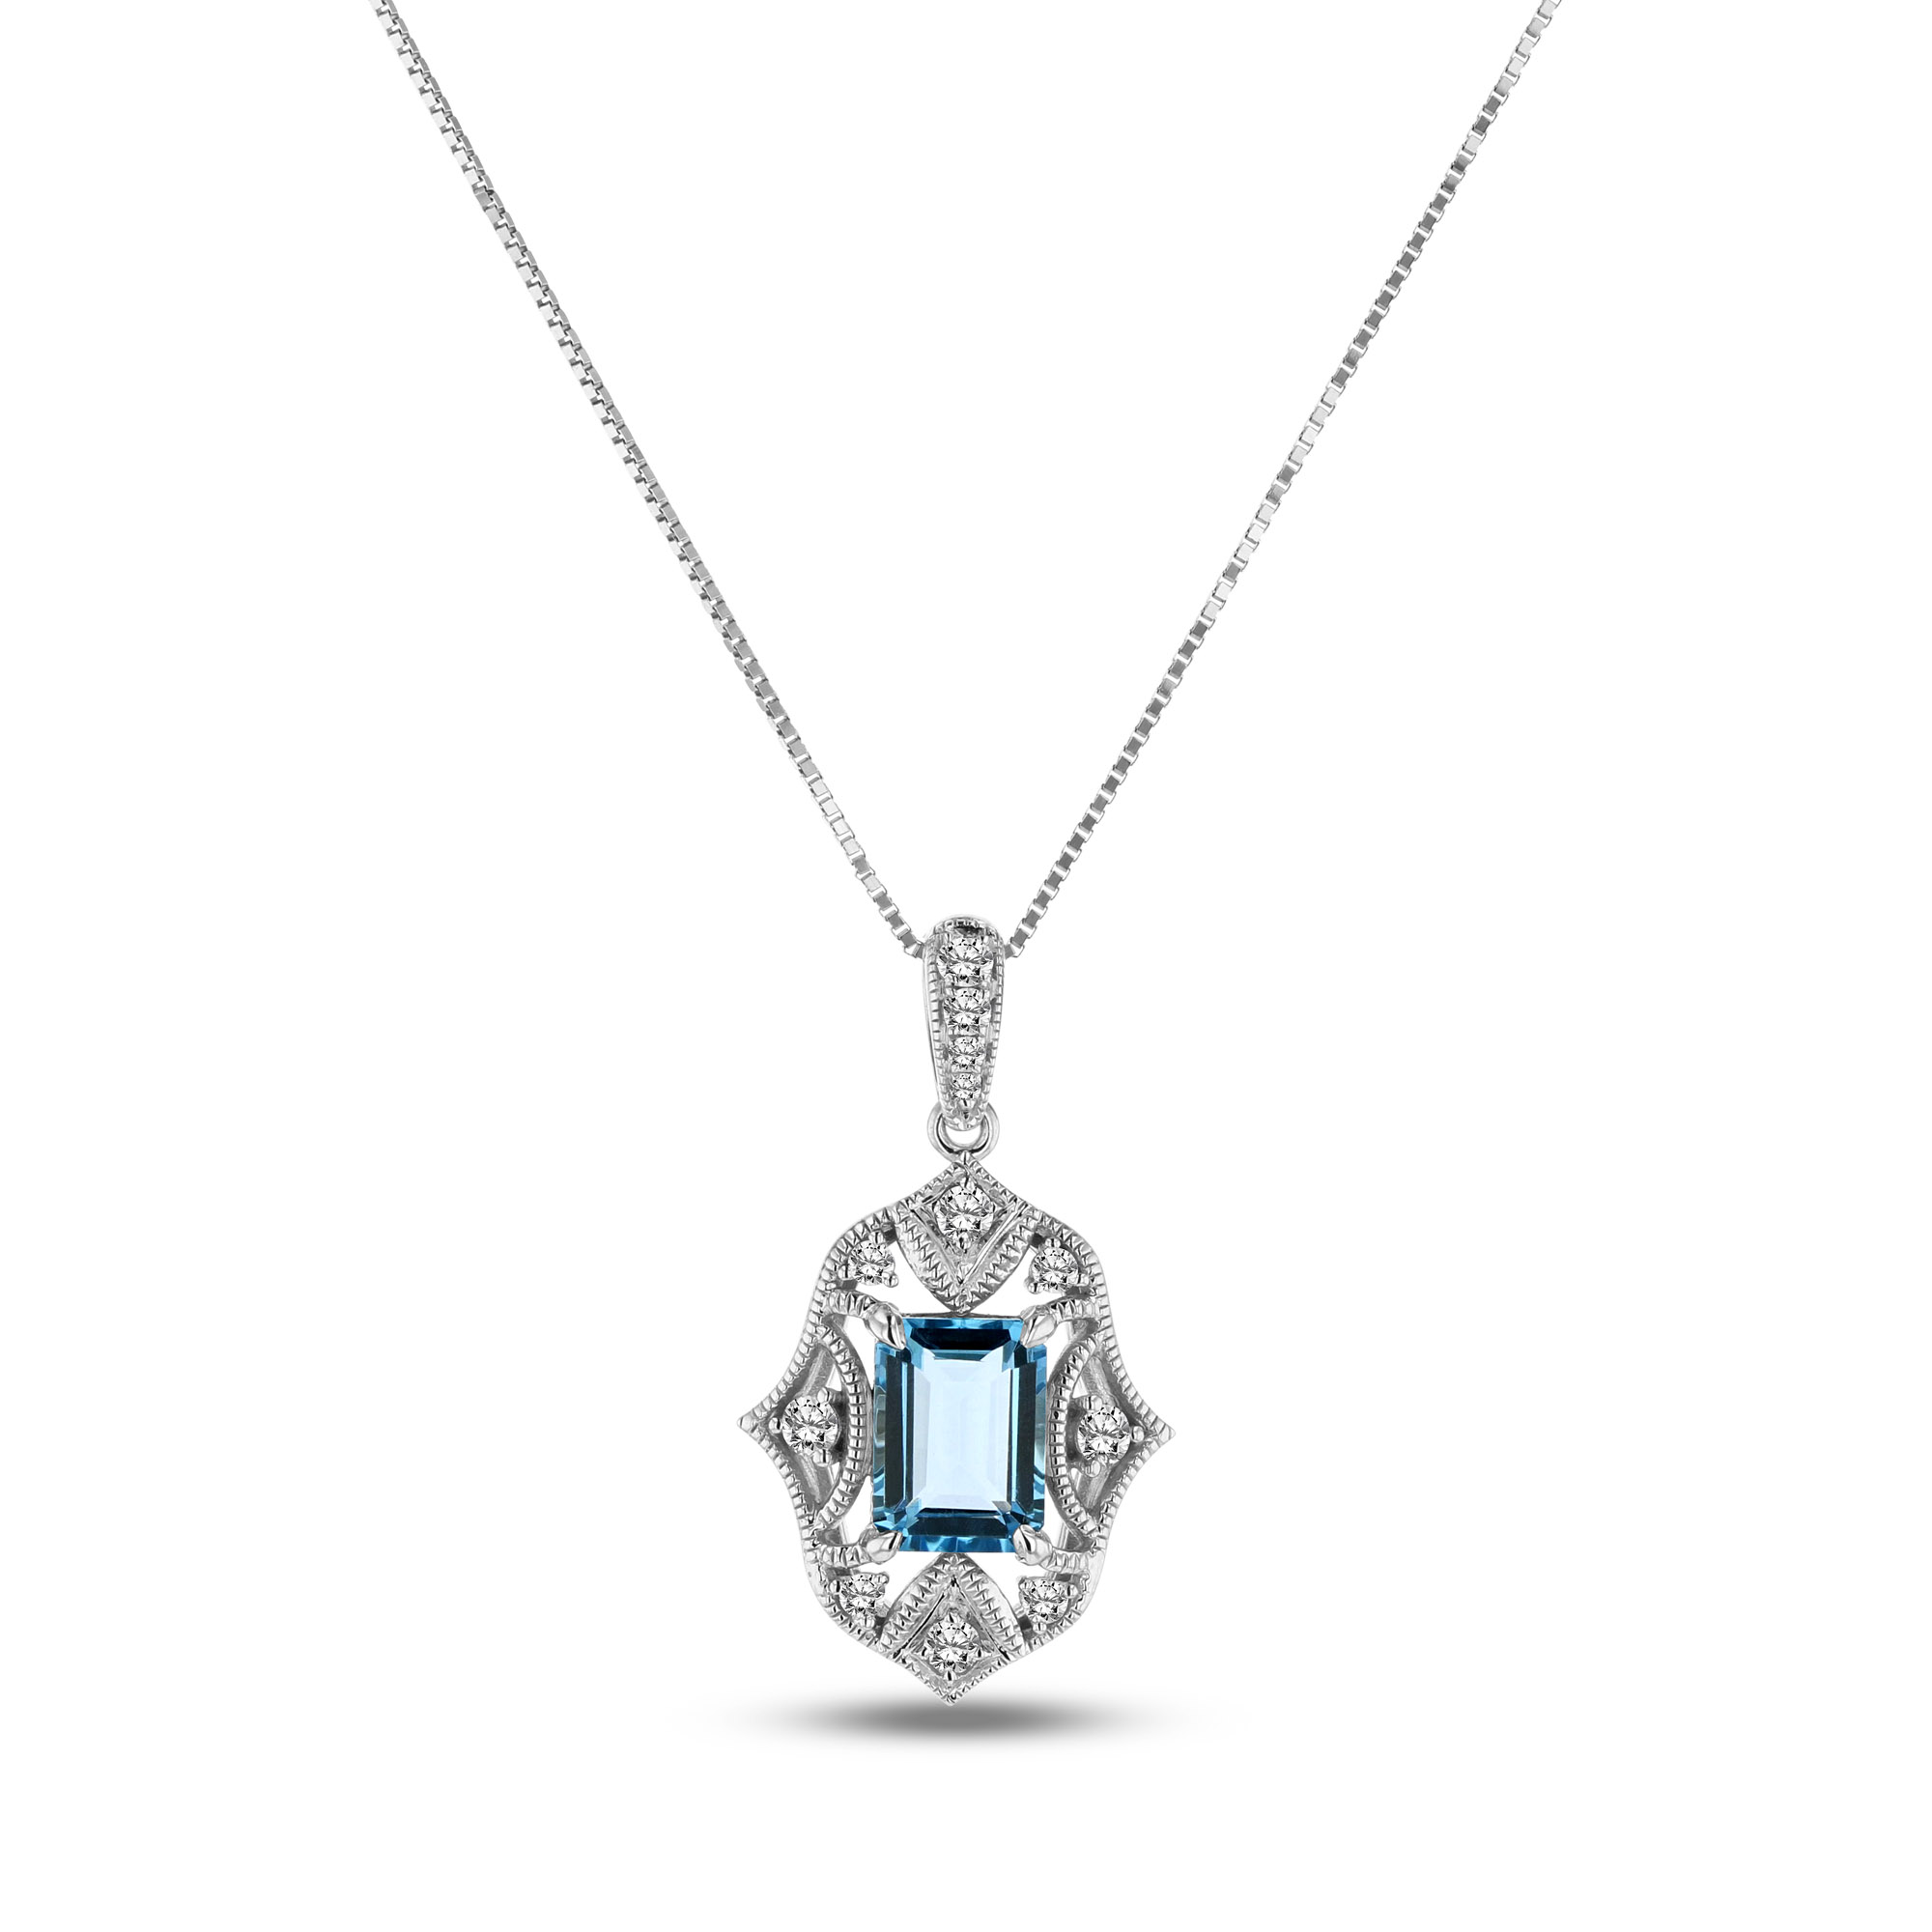 View 0.17ctw Diamond and Blue Topaz Pendant in 14k White Gold